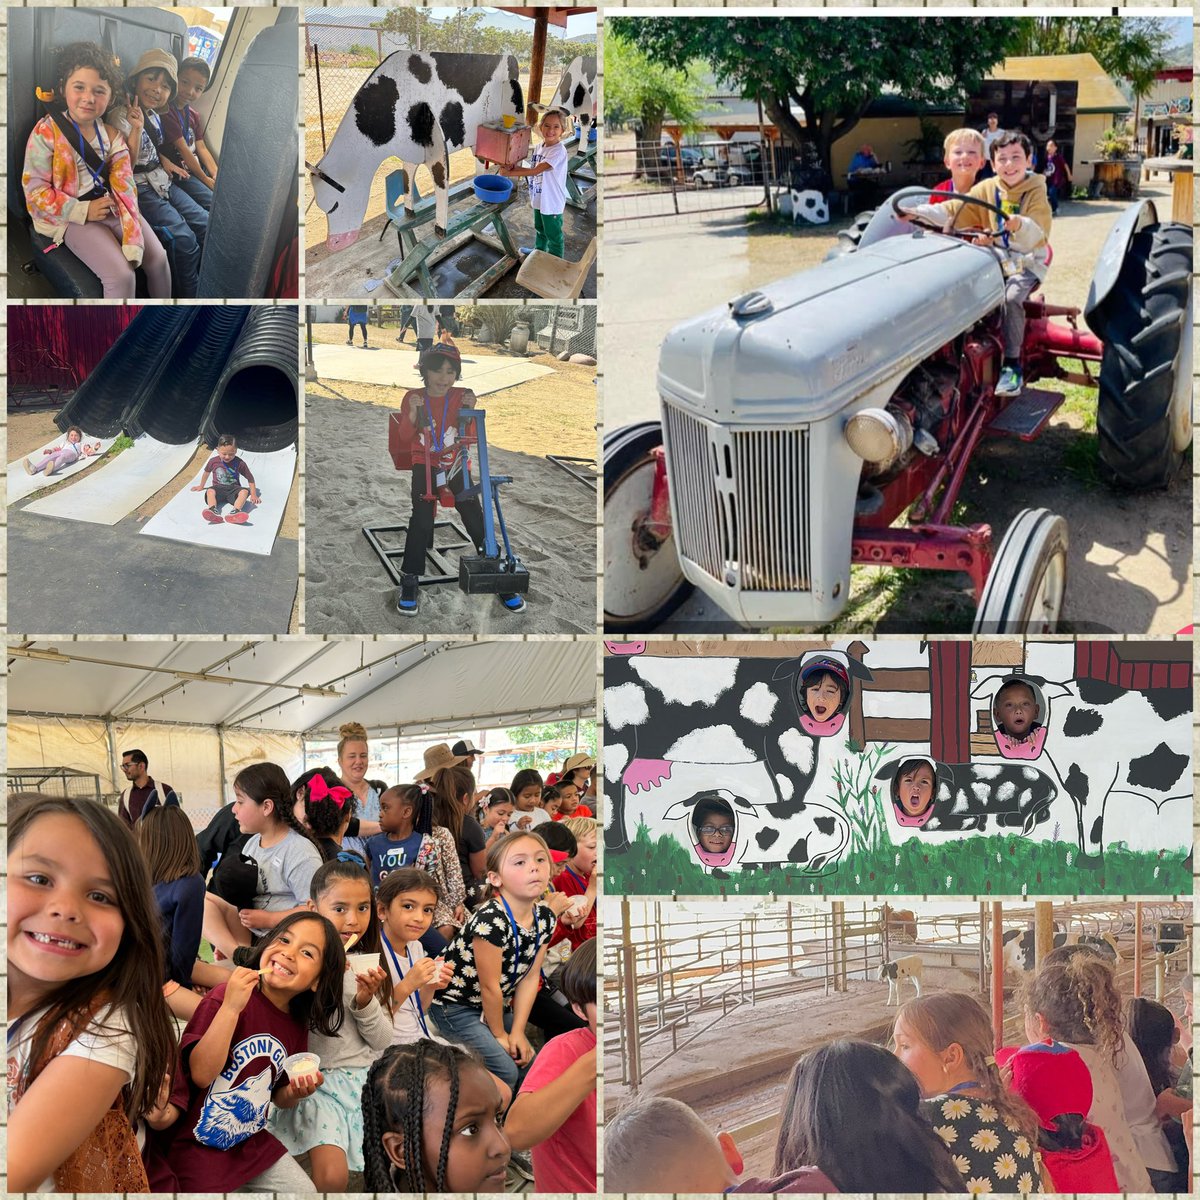 We learned all about the job of a farmer in the classroom so we had to see it in action at the farm! Saw how they milk a cow, care for baby calves, grow vegetables, and more! @CVWorldofWork @WorldOfWorkNet @BostoniaGlobal @MtraRamosR @Maestra_VRocha @CajonValleyUSD